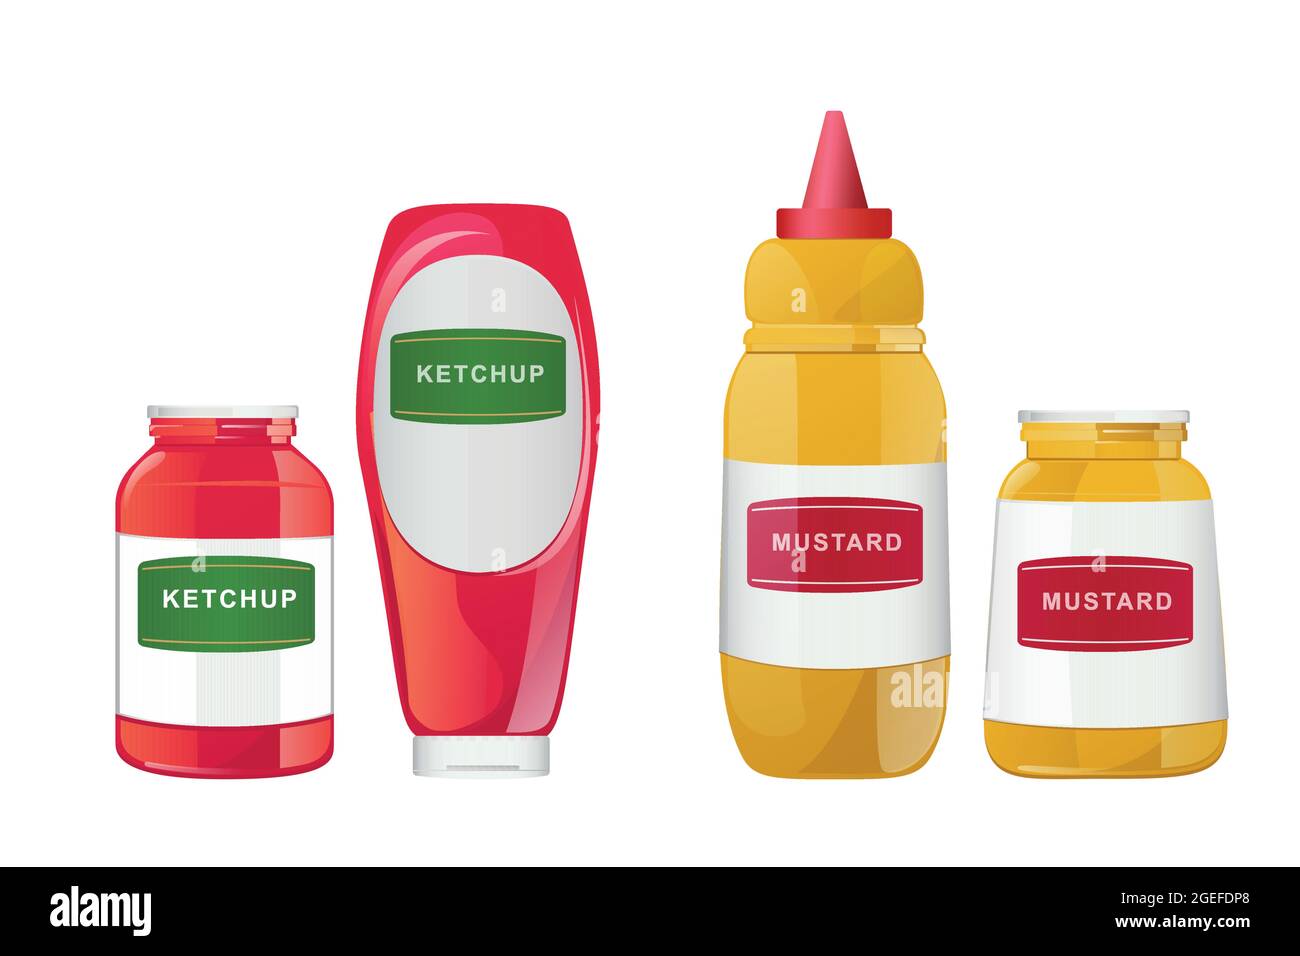 https://c8.alamy.com/comp/2GEFDP8/ketchup-mayonnaise-mustard-sauces-in-bottles-and-jars-set-realistic-vector-illustration-isolated-on-white-background-2GEFDP8.jpg